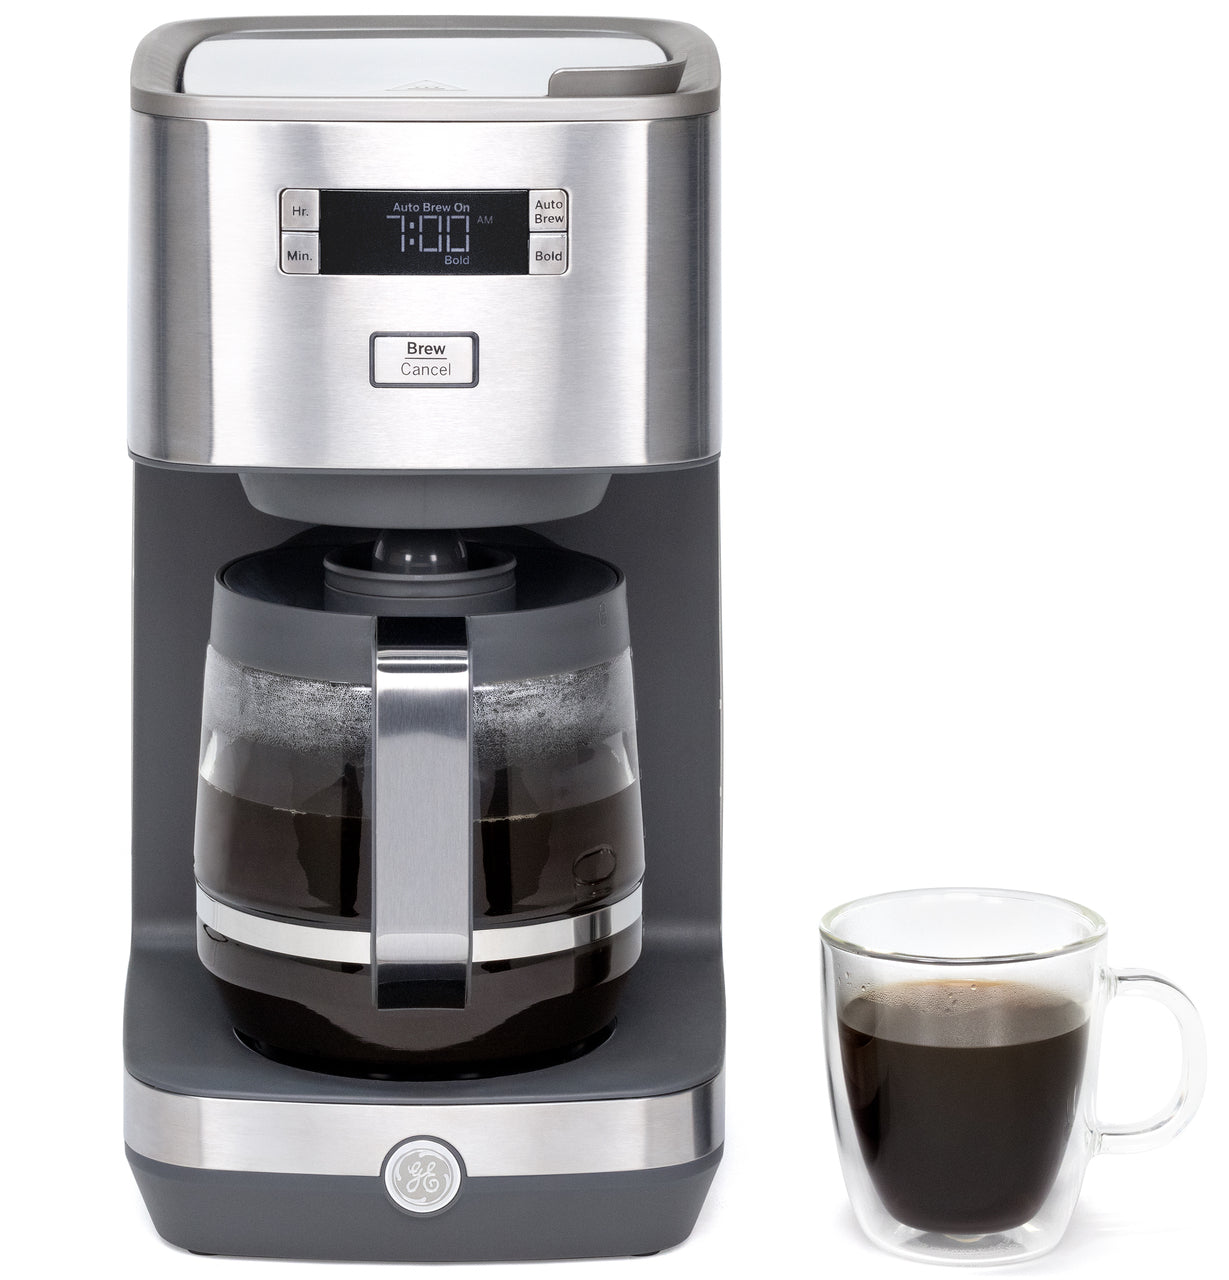 Coffee Maker, 12-Cup, Pause & Serve, Glass Carafe, White